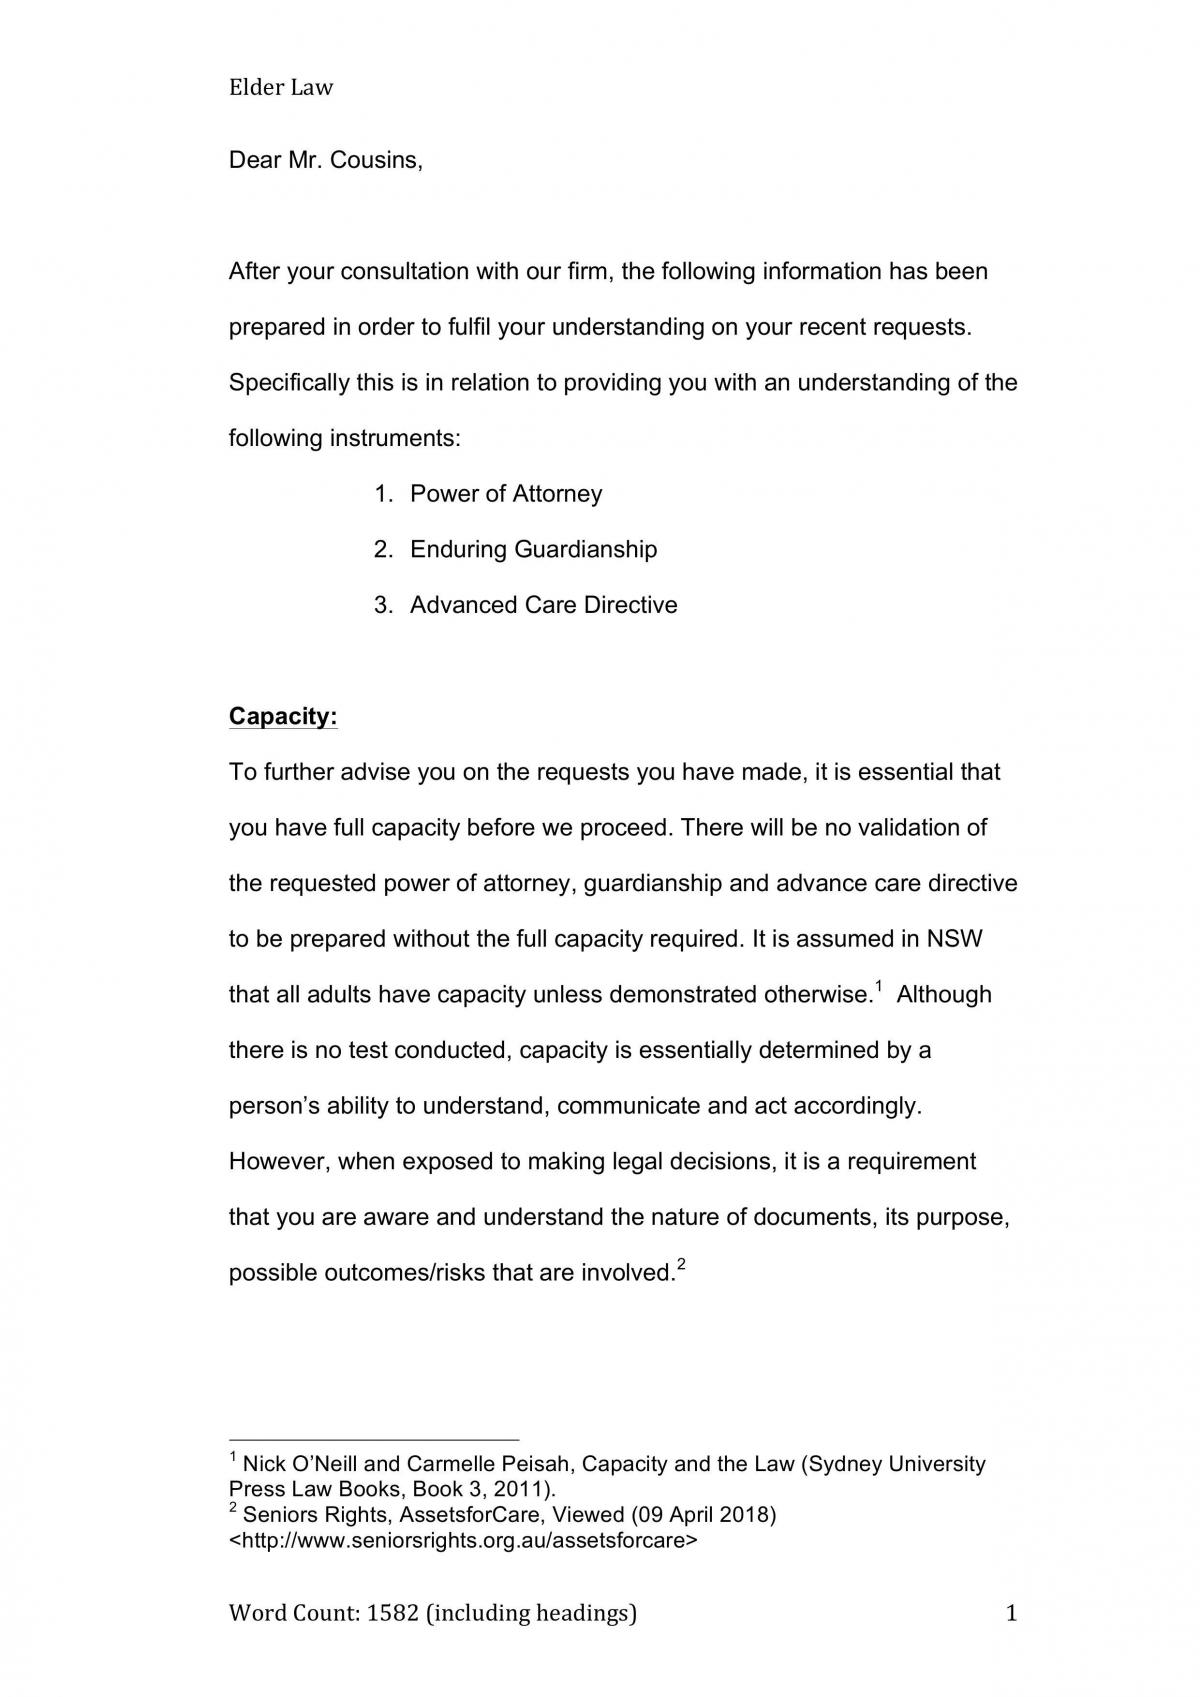 Elder Law Assignment - Page 1